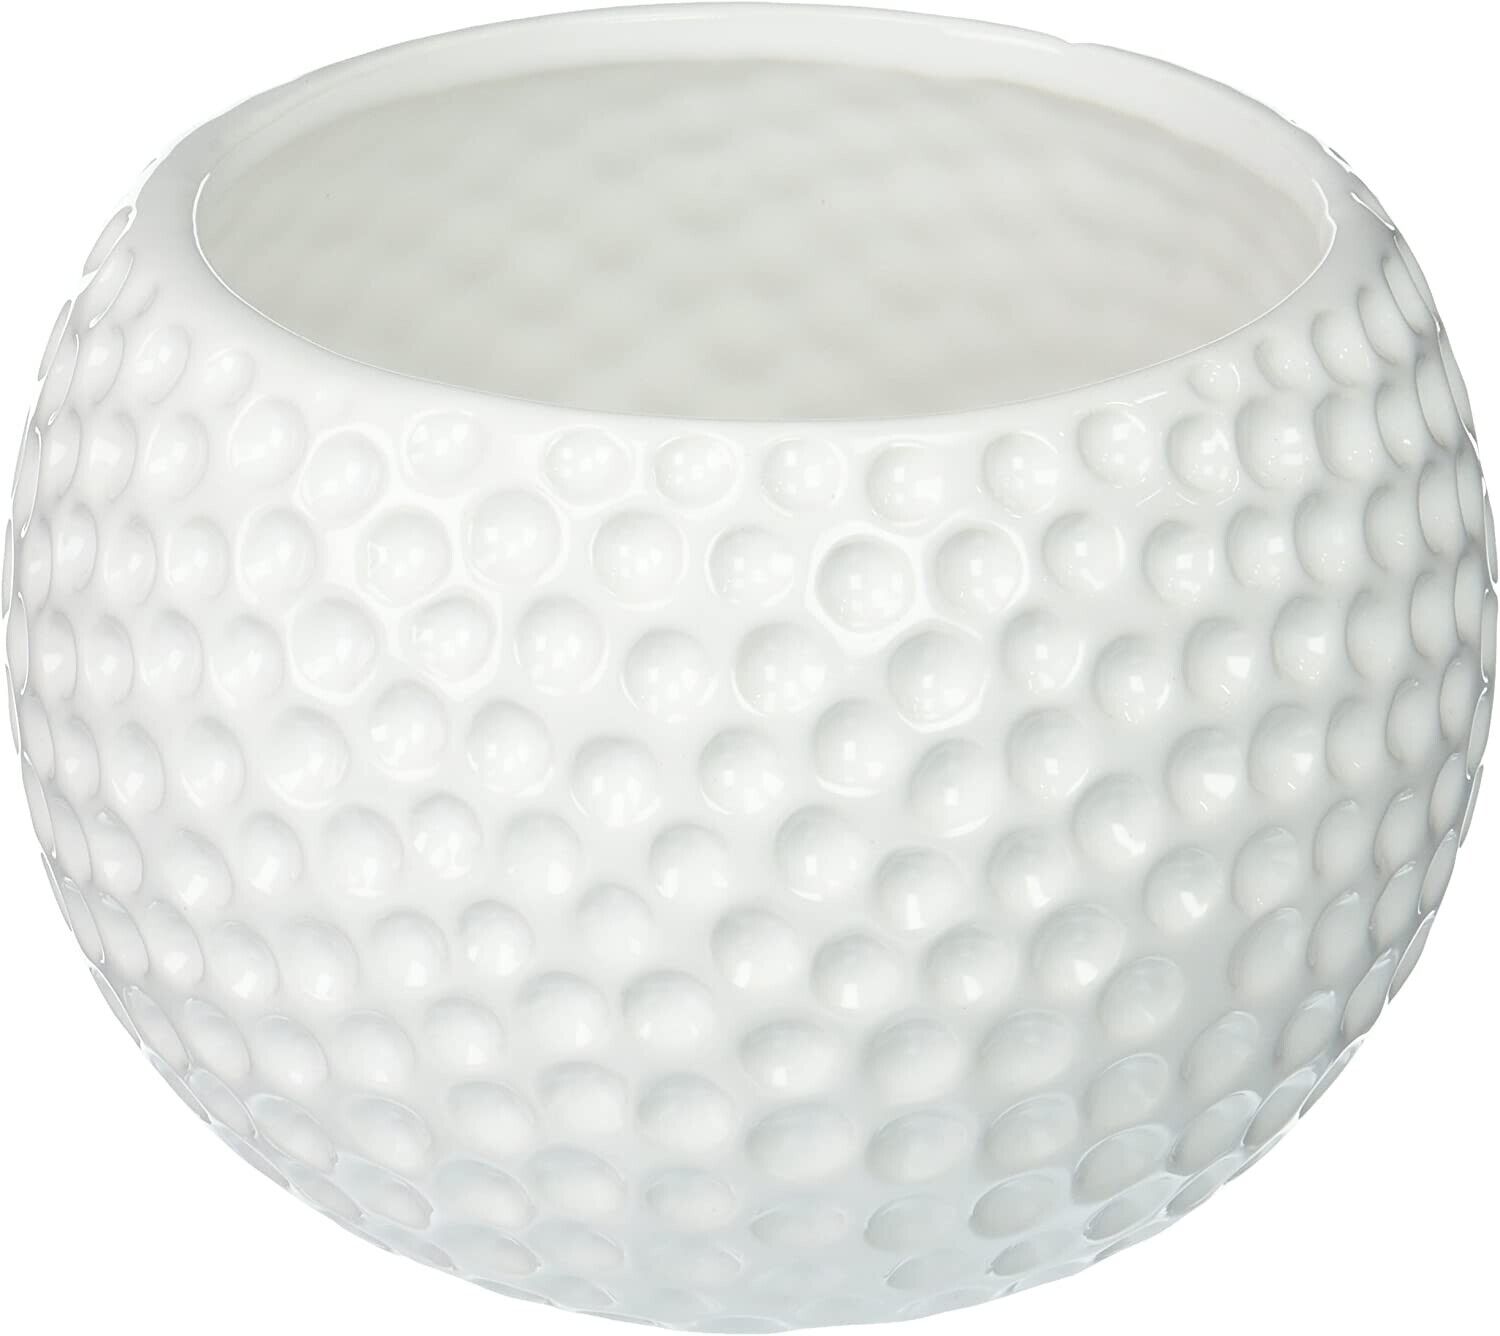 Large Ceramic Golf Ball Container - Use as a Planter, Candy Dish or Gift Basket